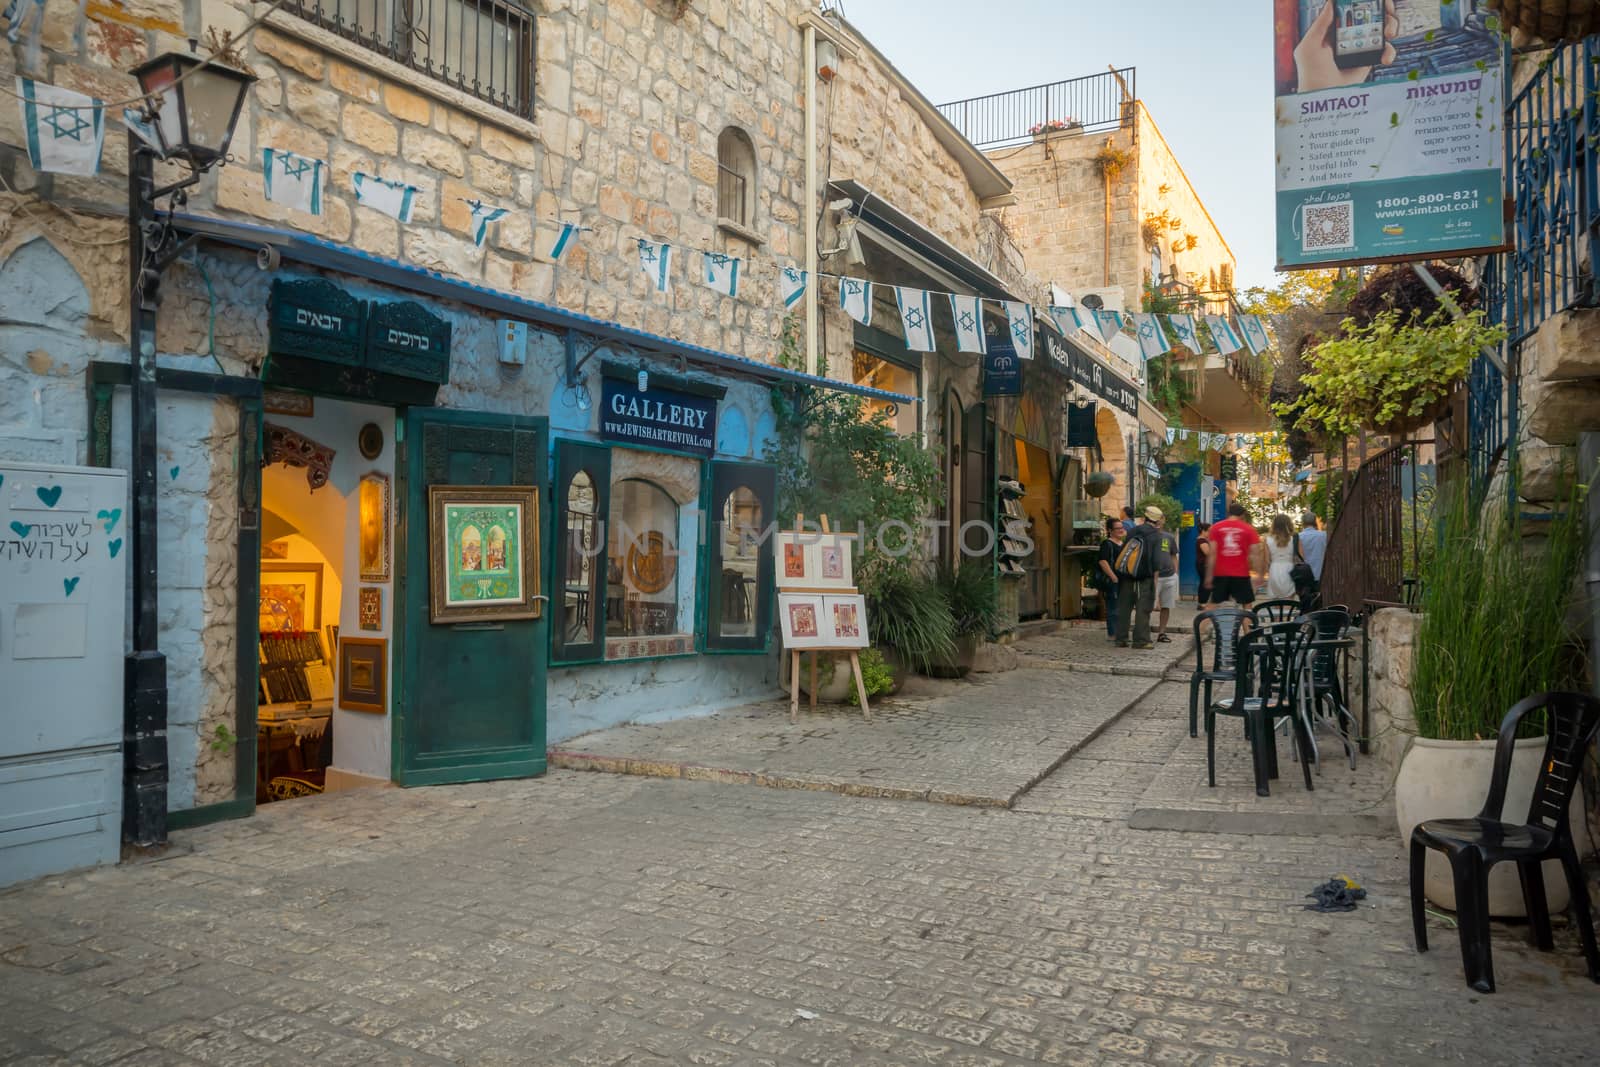 Alley scene in Safed (Tzfat) by RnDmS